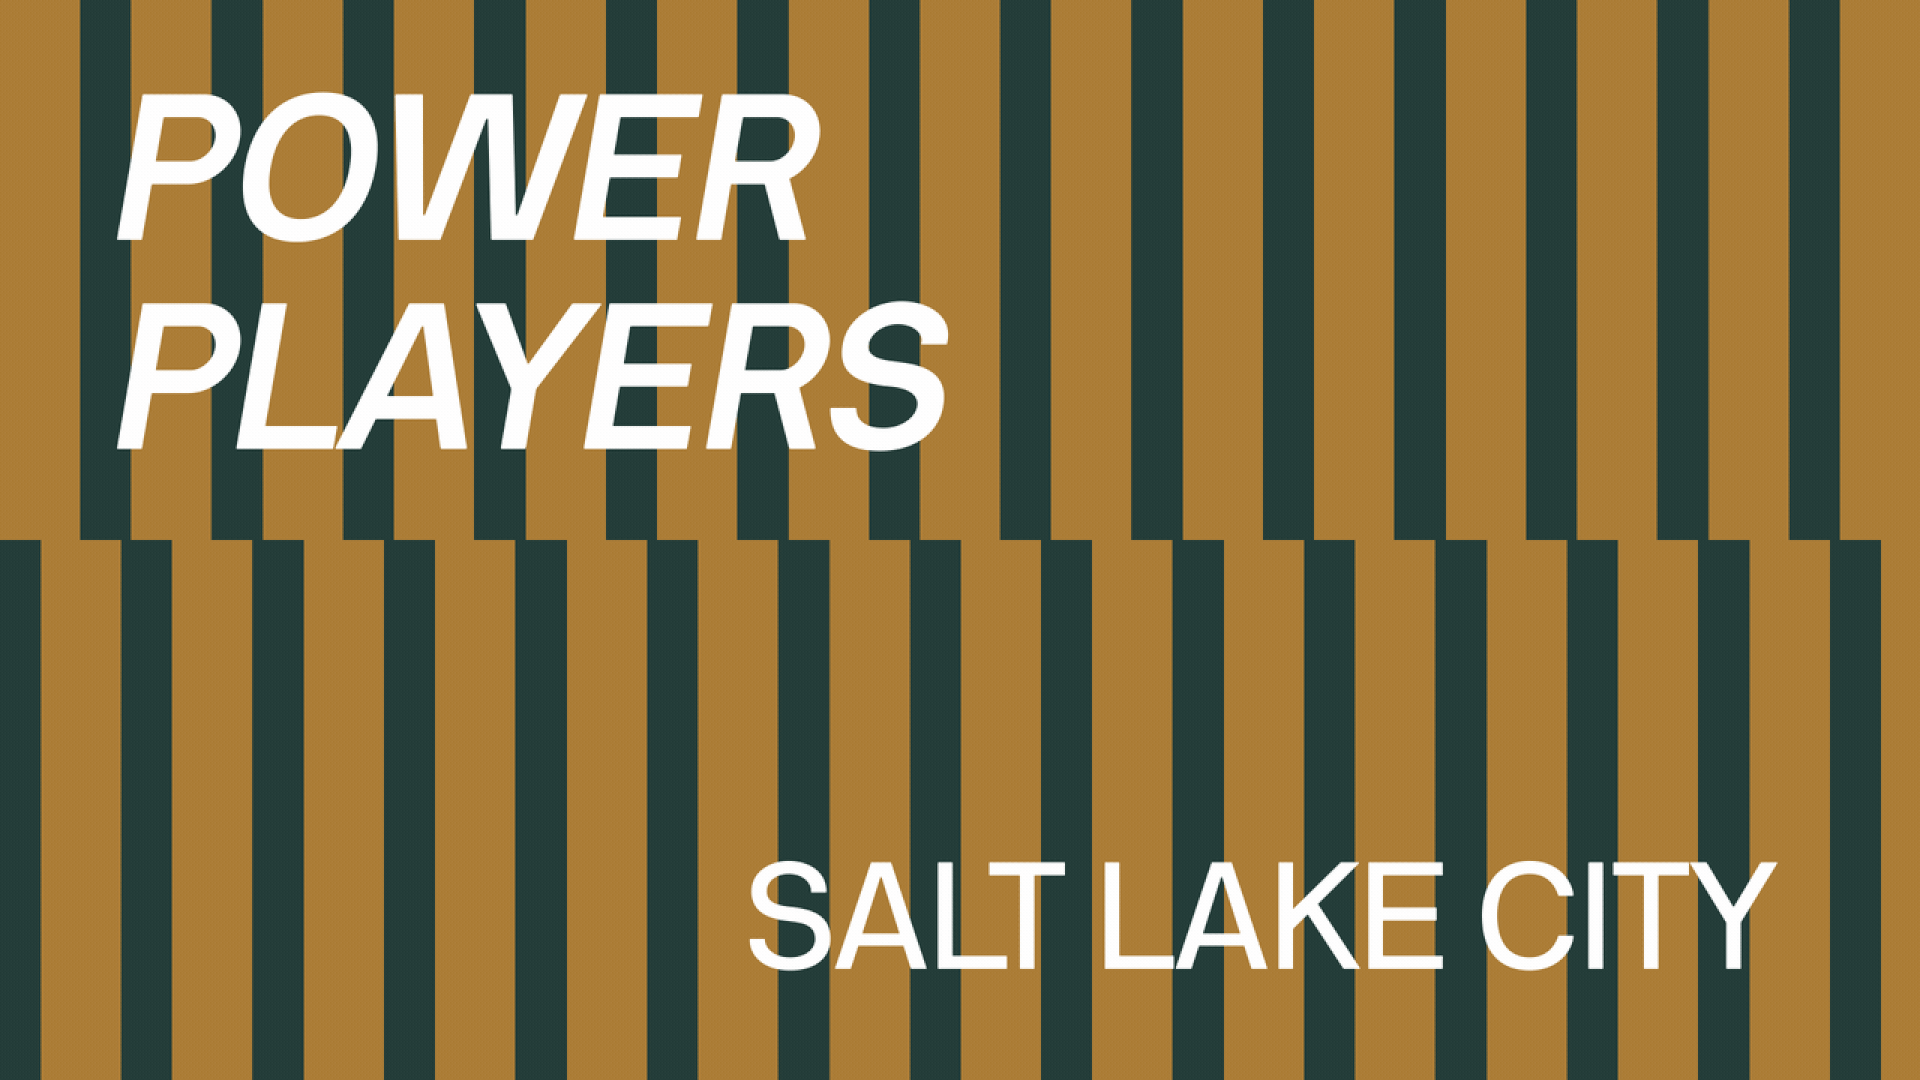 Illustration of two rows of dominos falling with text overlaid that reads Power Players Salt Lake City.